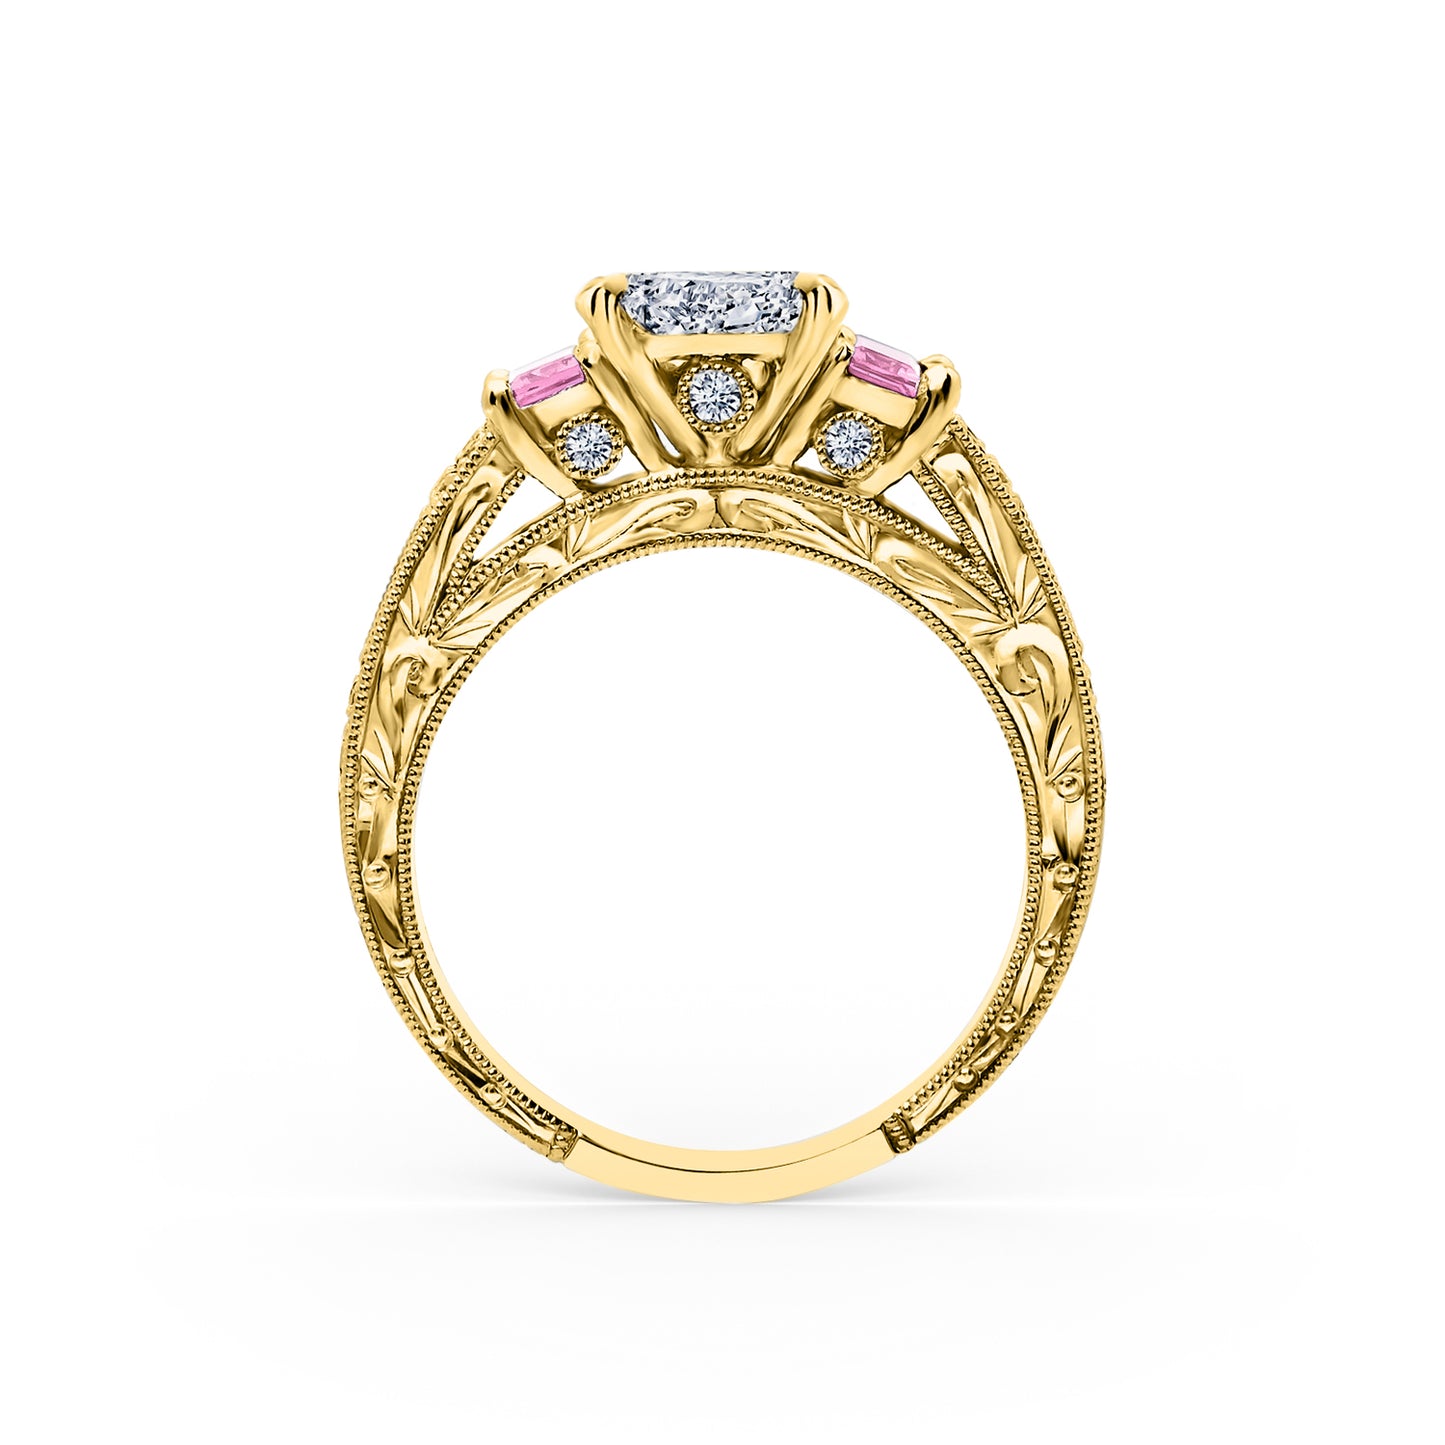 Deco Three Stone Engraved Pink Sapphire Baguette Diamond Engagement Ring